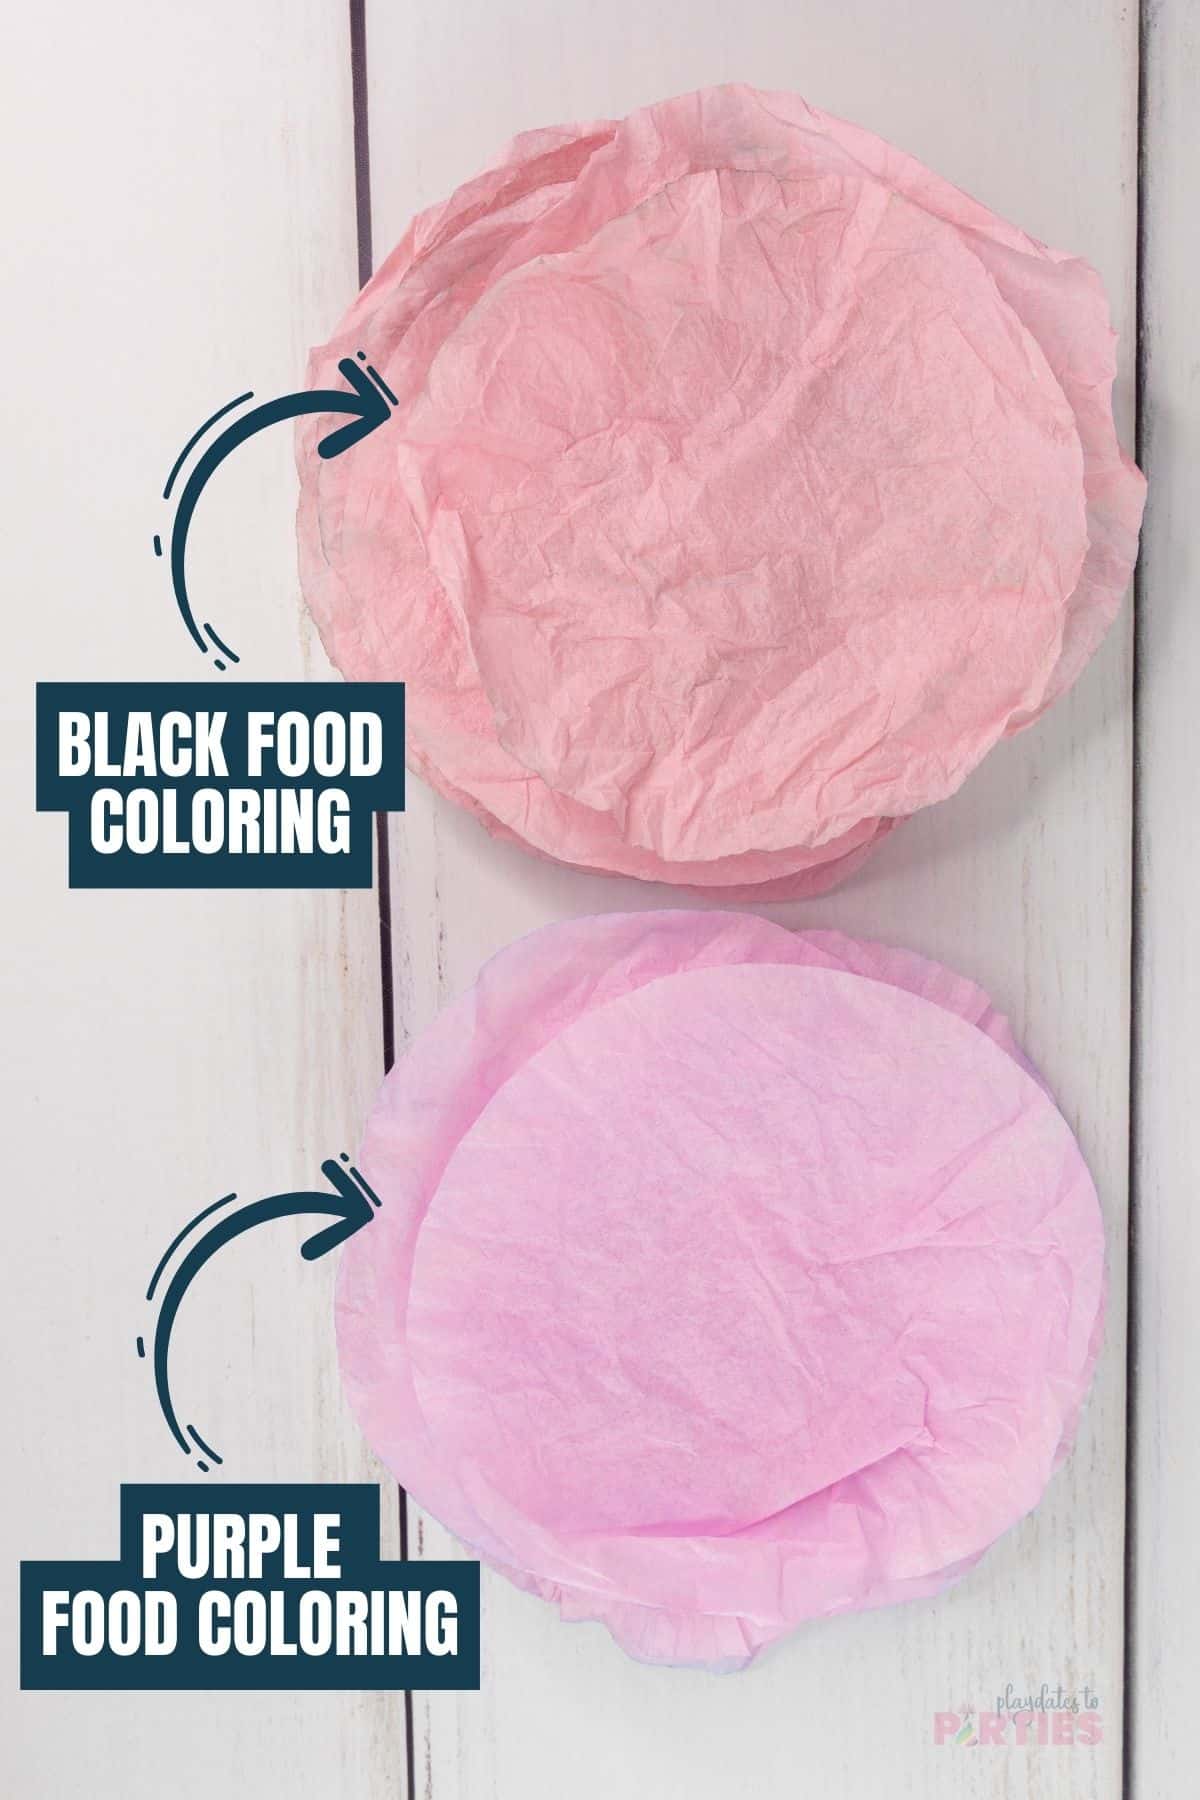 Filters dyed with black food coloring have a softer and warmer look than filters dyed with purple food coloring.